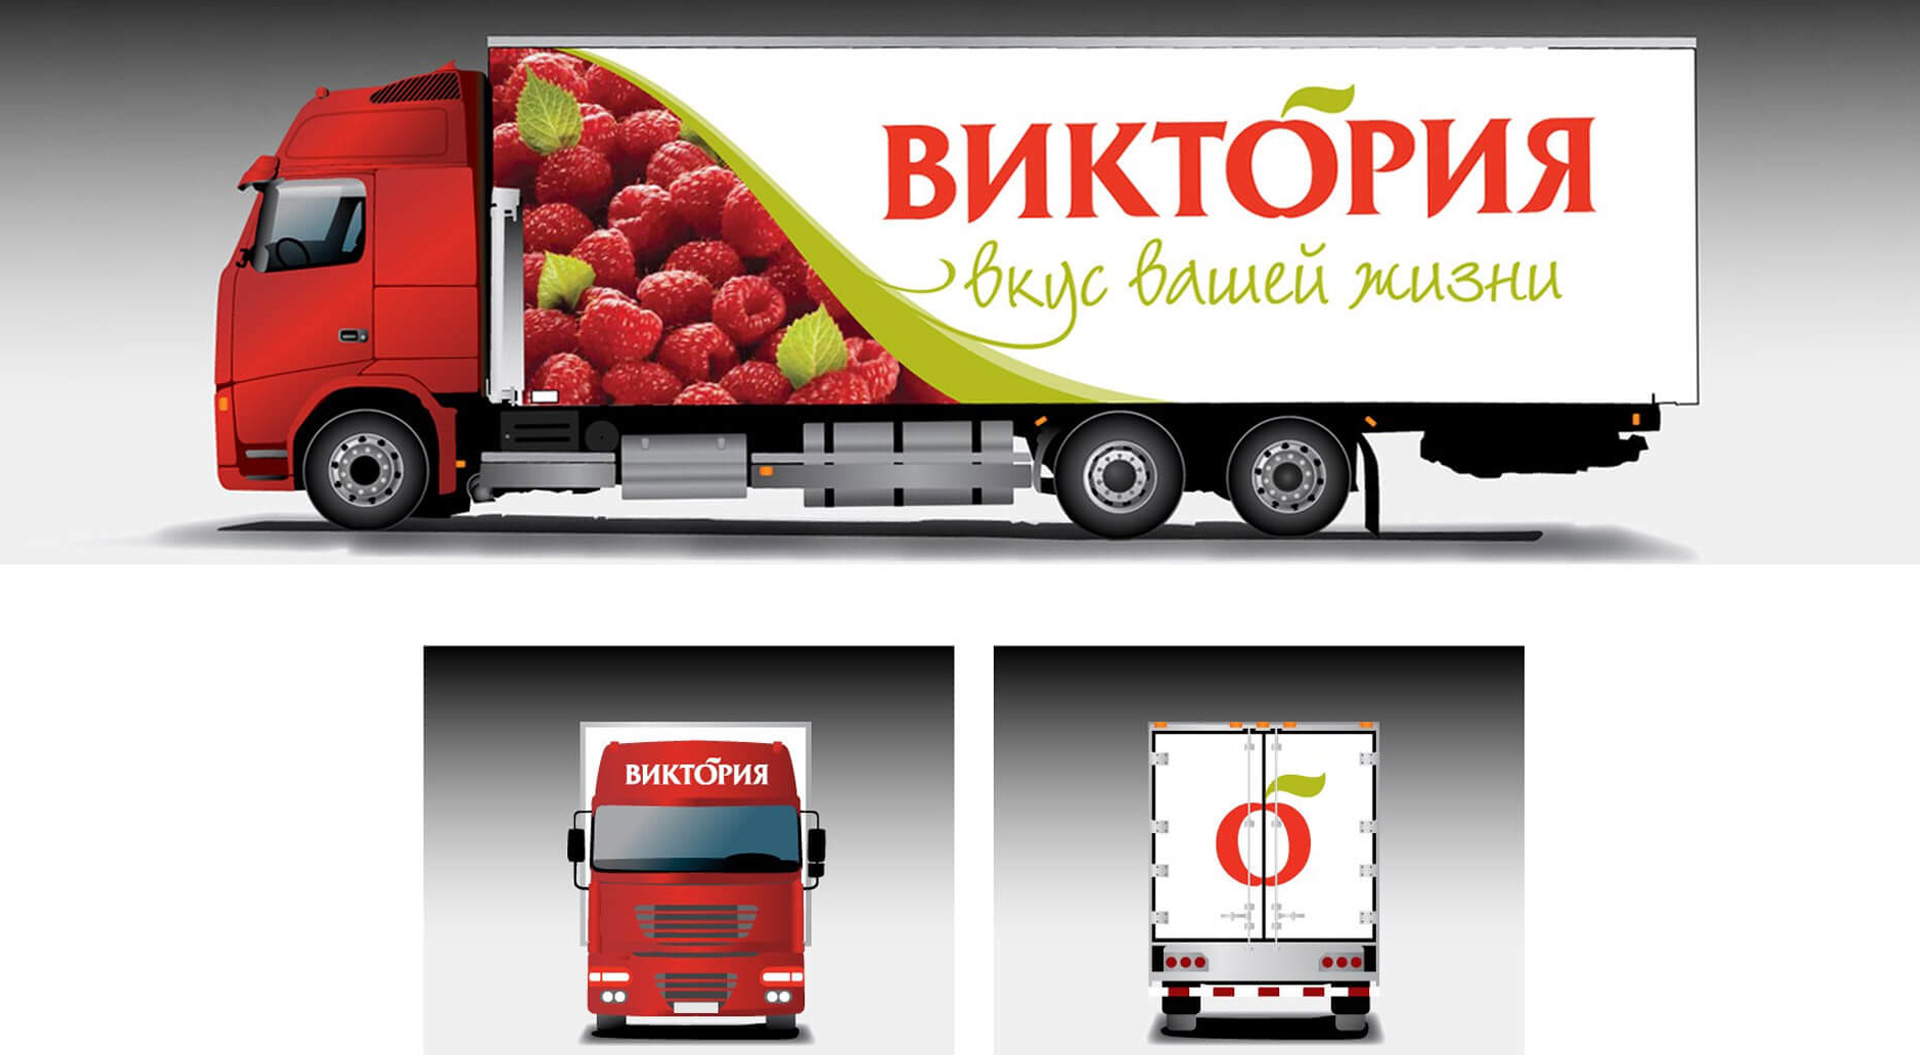 Victoria supermarkets Russia branding and advertising on trucks